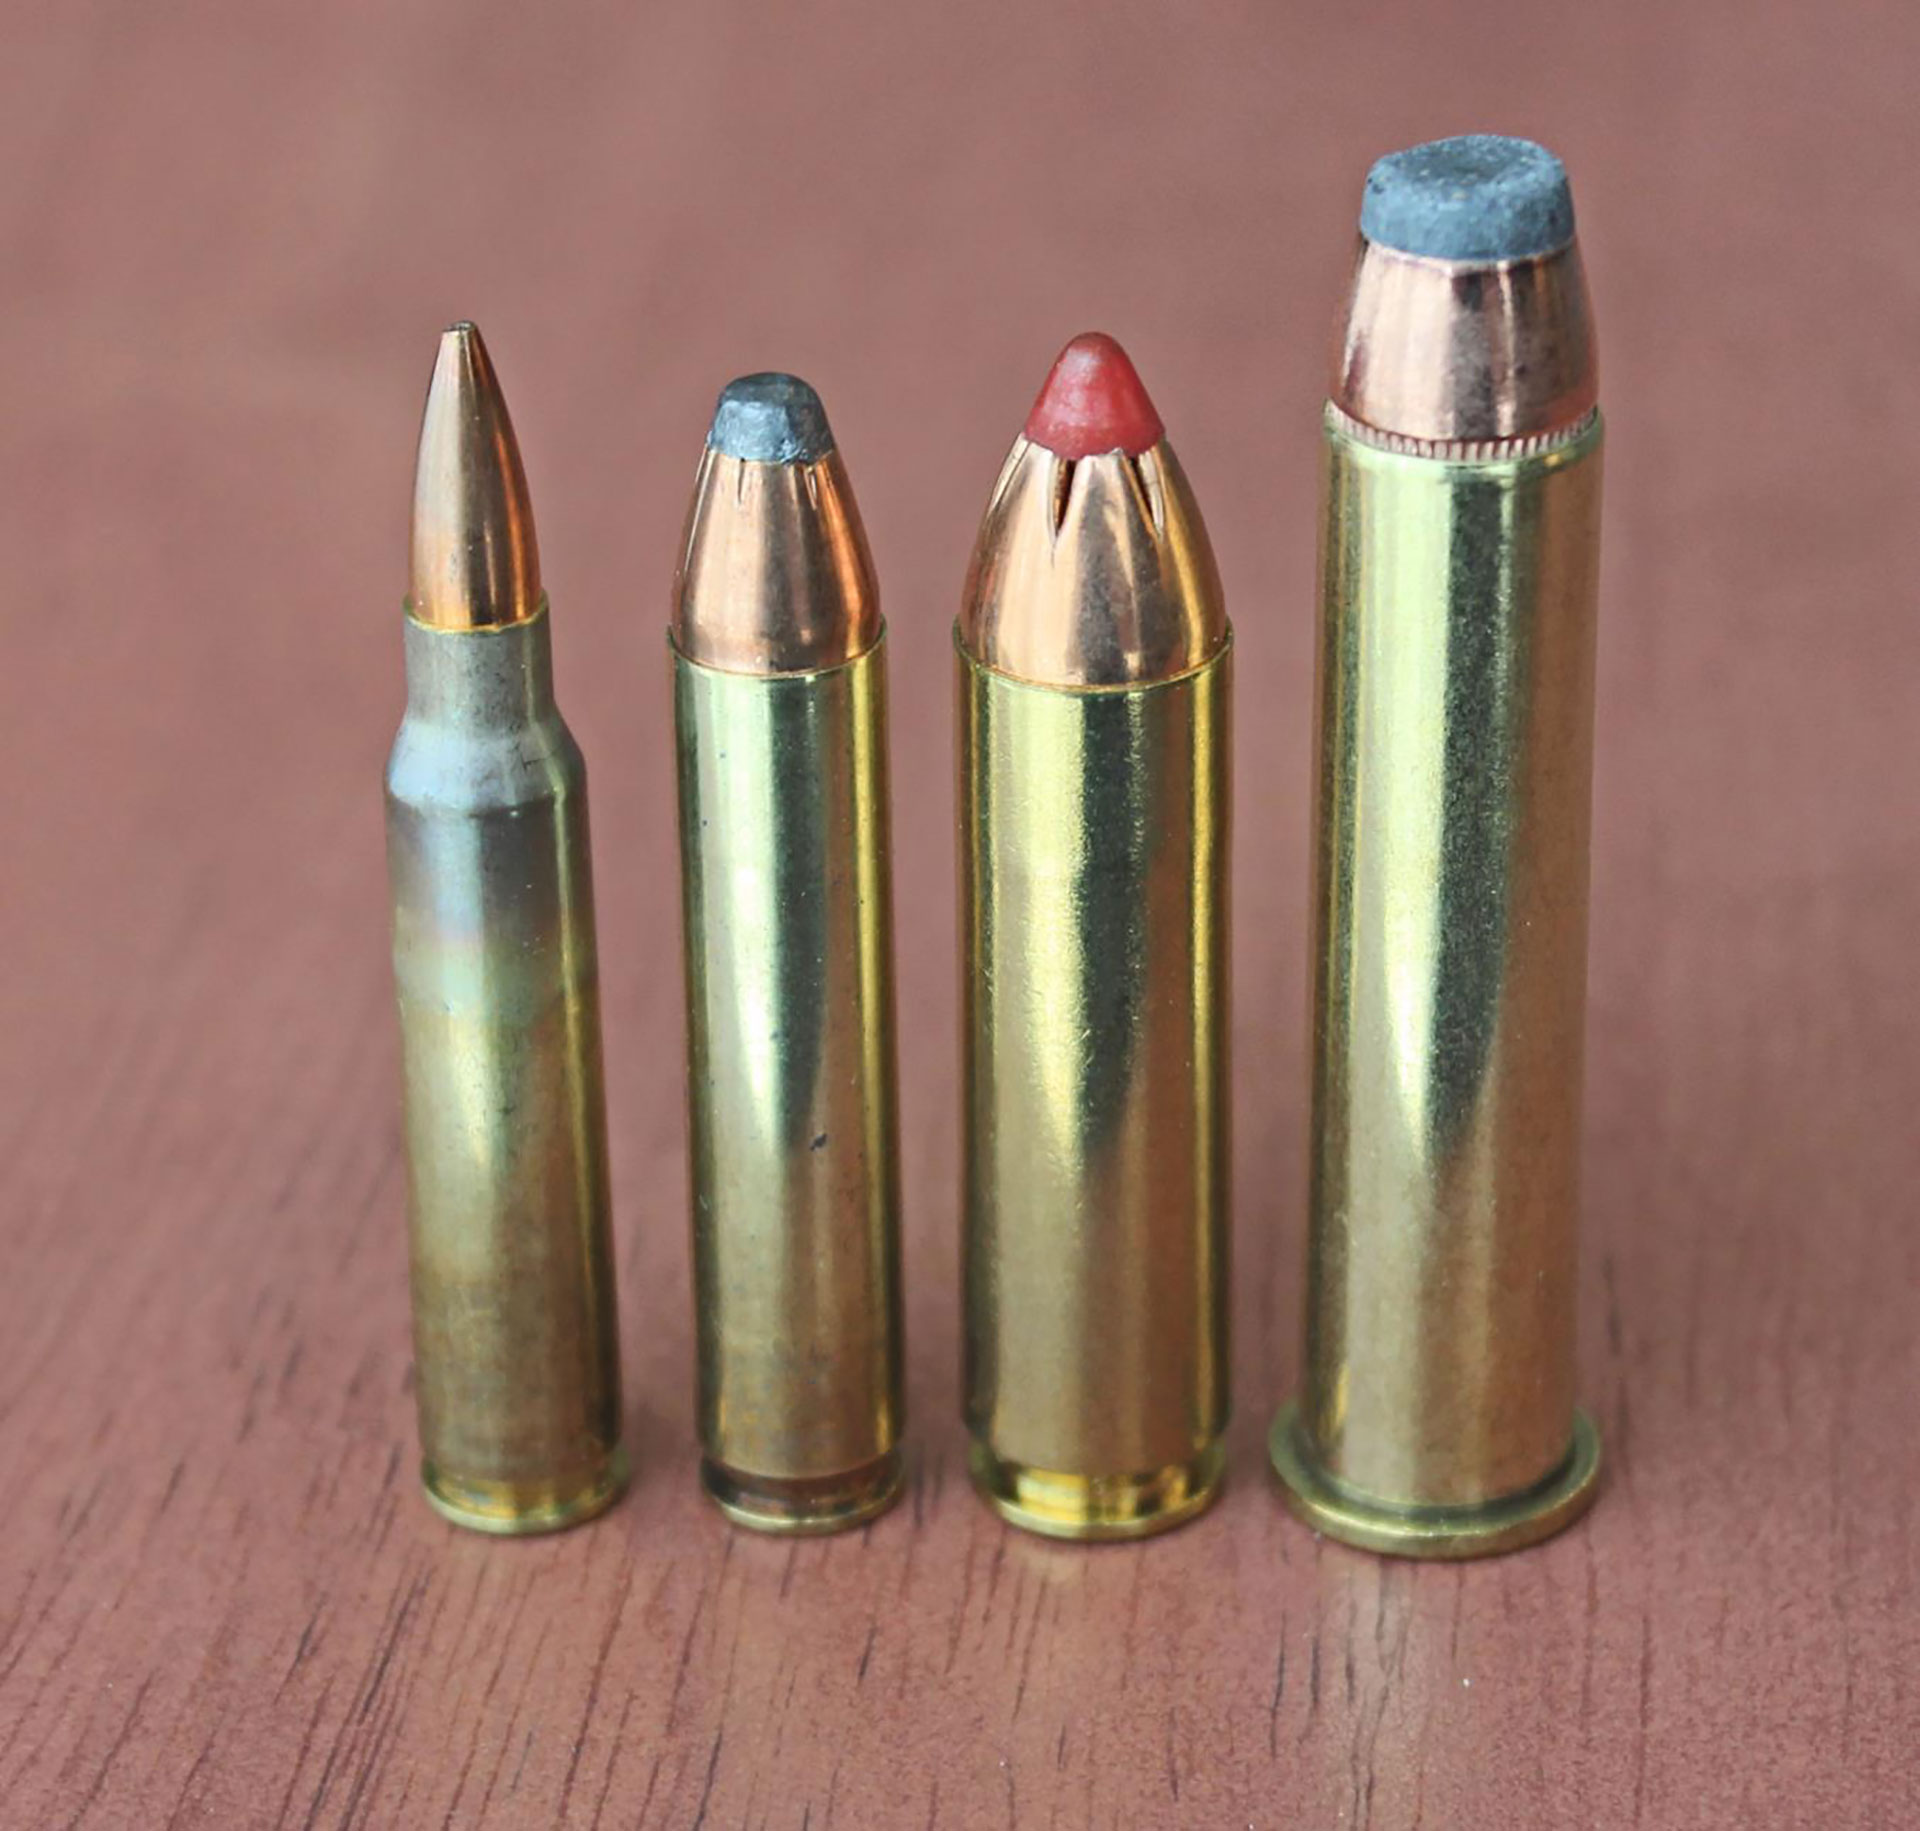 From left to right: .223 Rem., .350 Legend, .450 Bushmaster and .45-70 Gov’t.